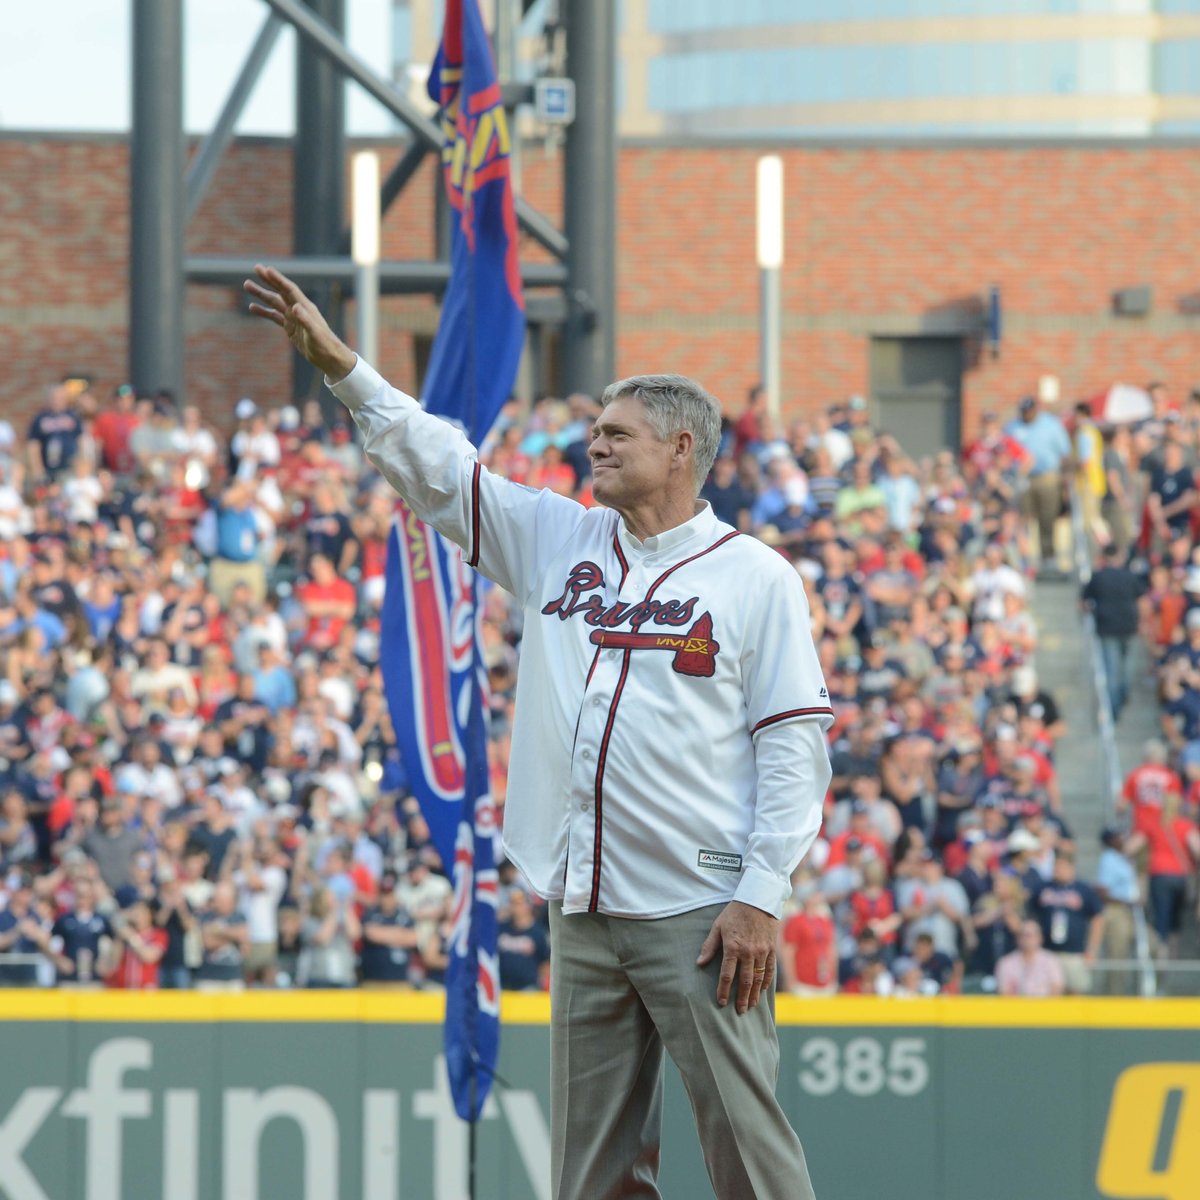 Braves legend Dale Murphy excited about World Series 